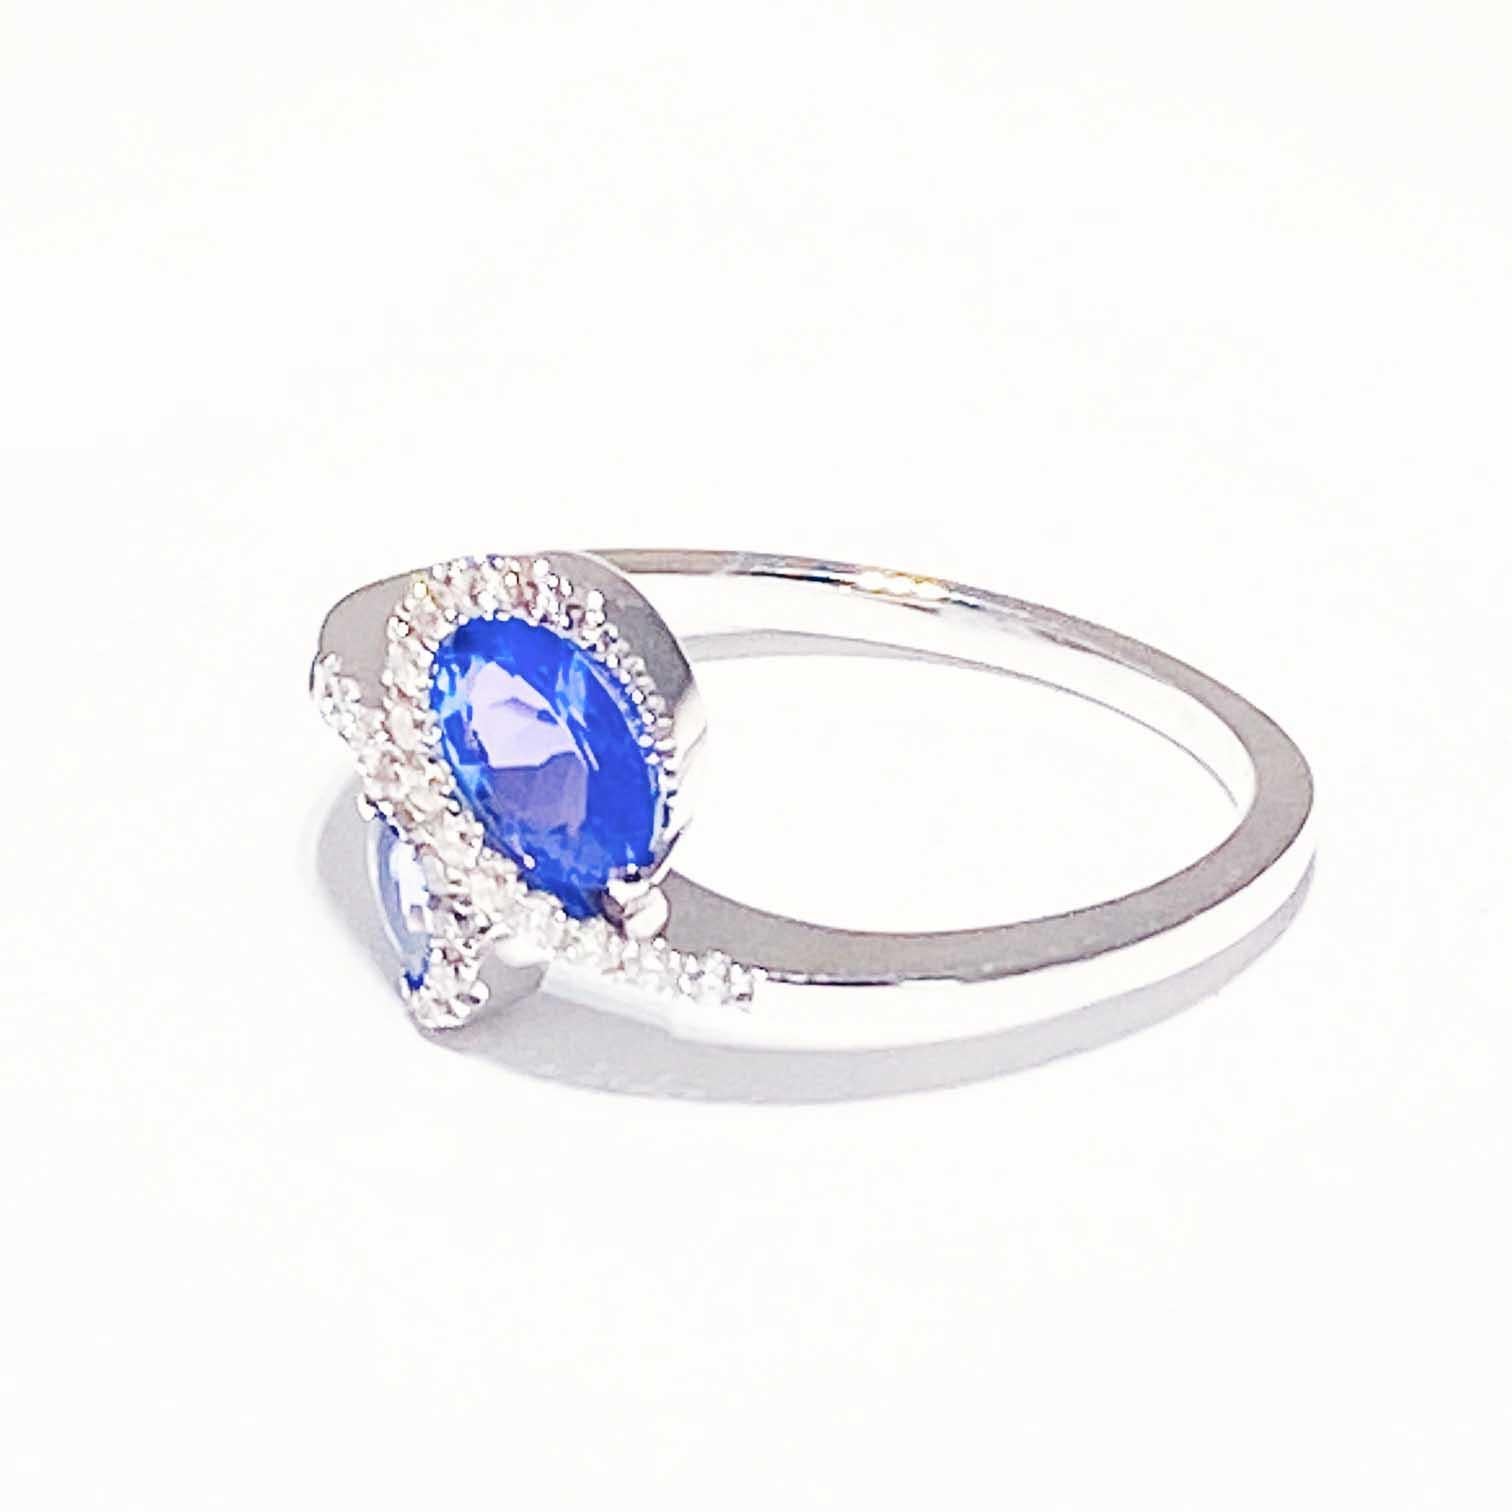 Custom, Designer, Asymmetric design with genuine tanzanite and diamonds! The ring holds two gorgeous, genuine tanzanite gemstone that are framed by diamonds set in a bypass design. The ring setting is whimsical and stunning! This would make a great